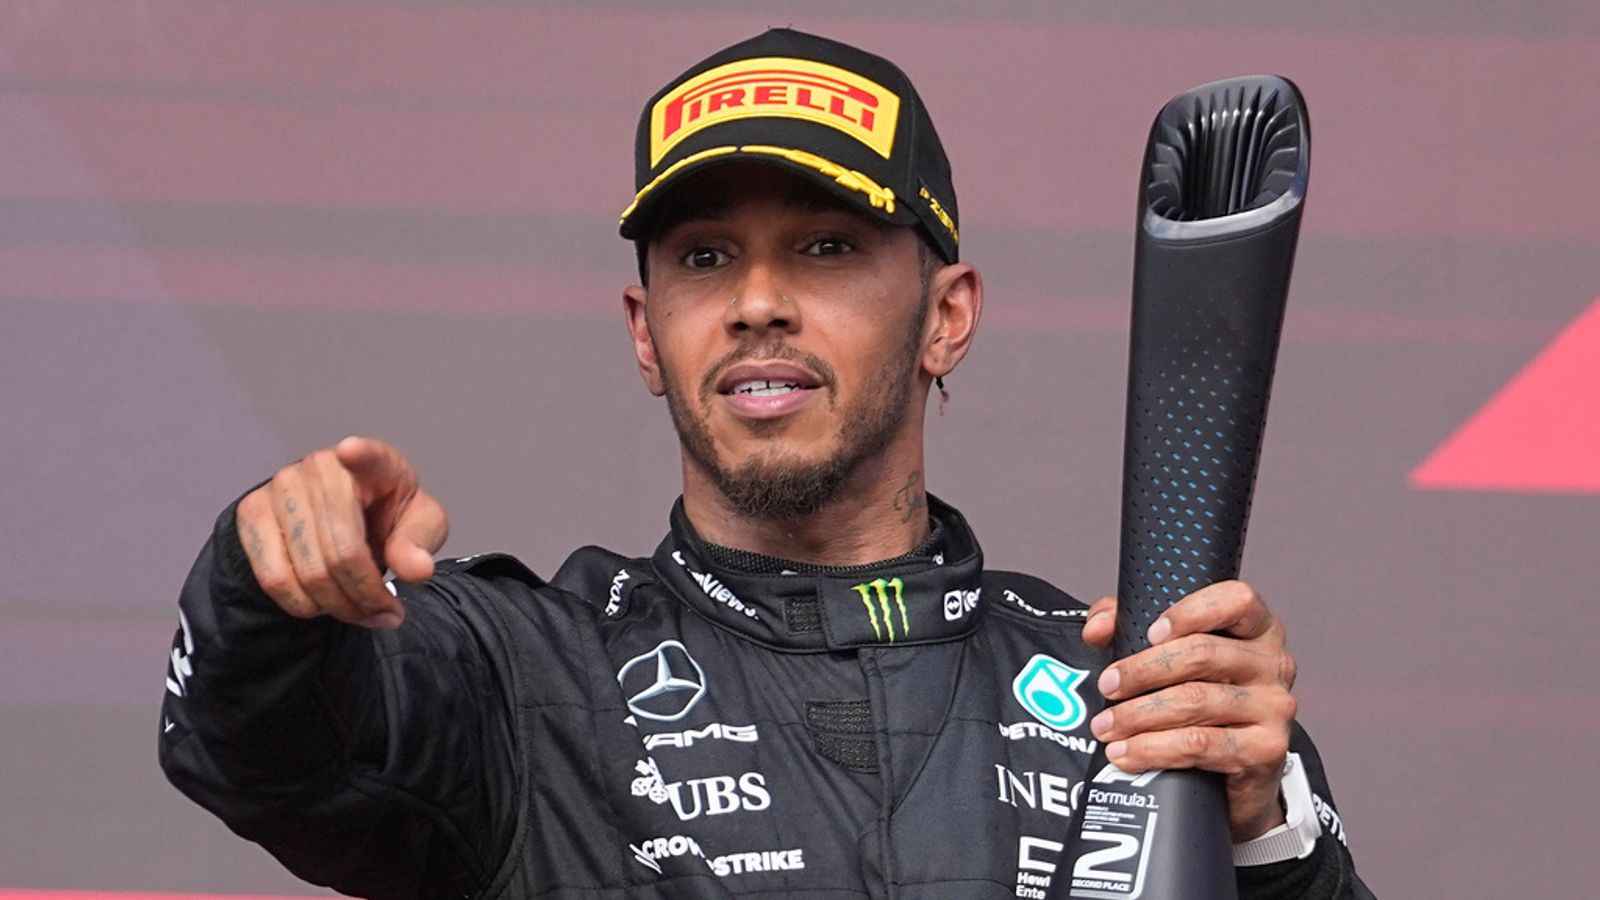 Lewis Hamilton to move to Ferrari: F1 driver has the chance to do something  extraordinary | UK News | Sky News